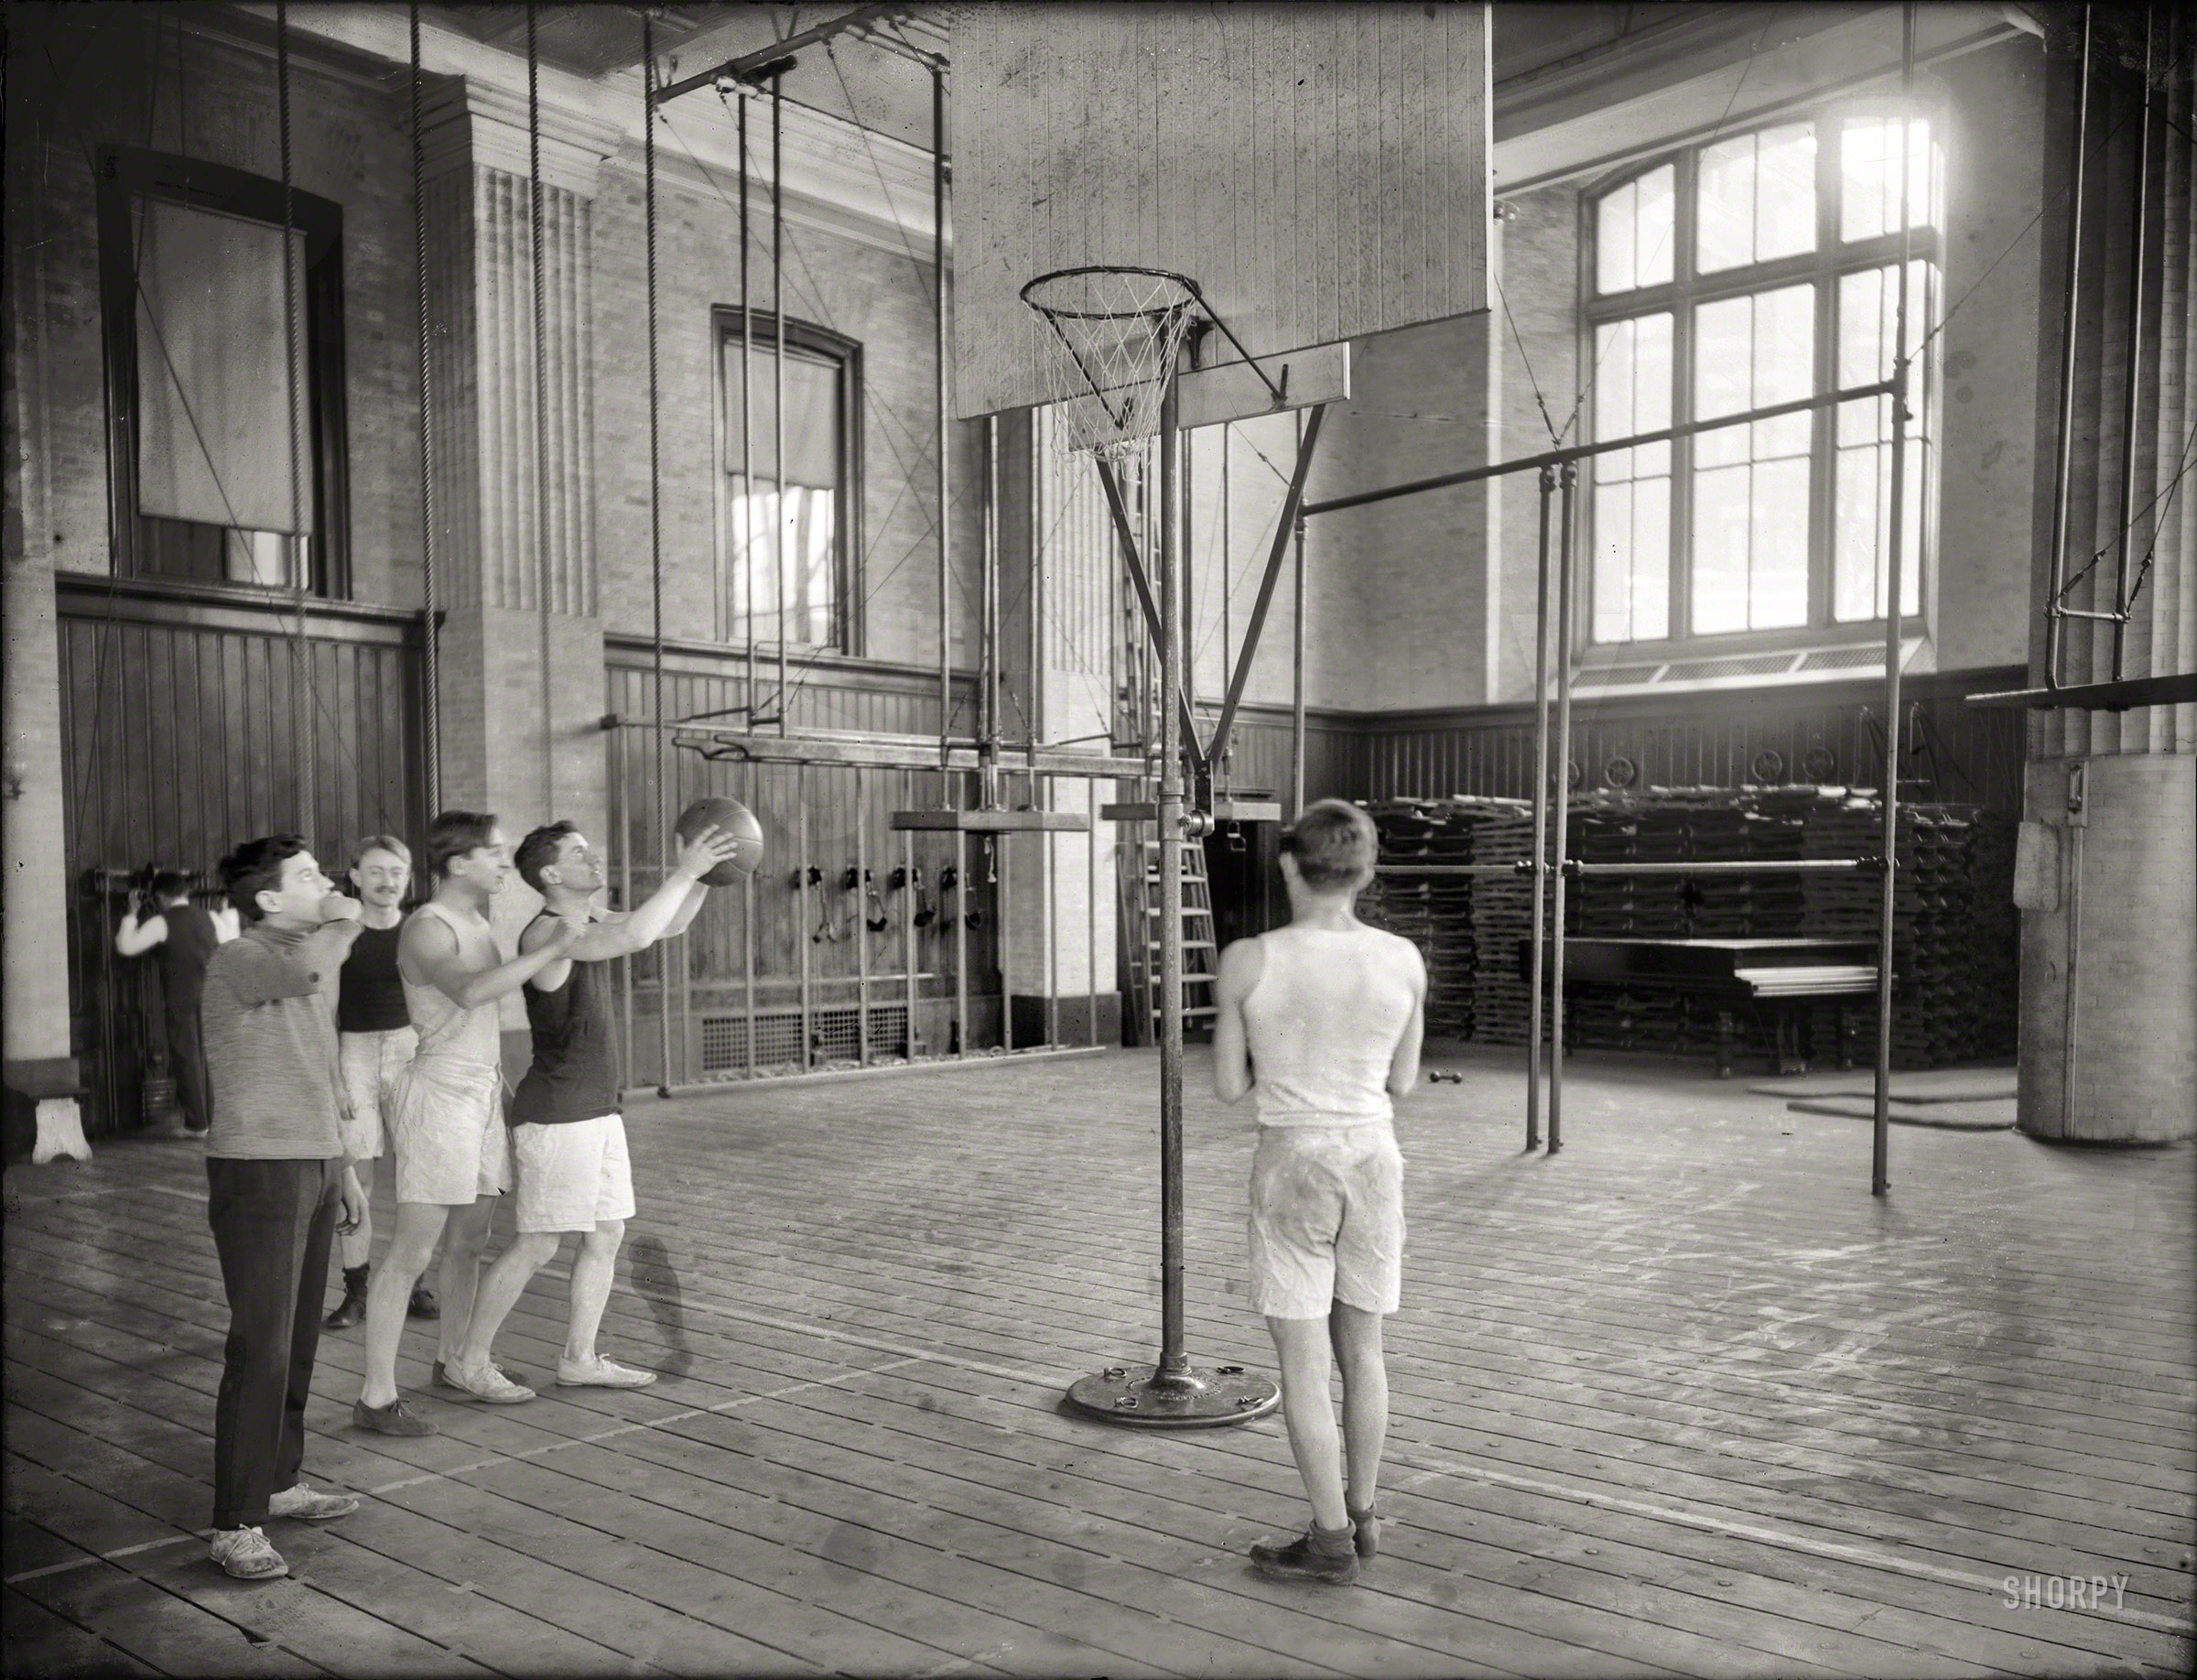 &nbsp; &nbsp; &nbsp; &nbsp; No doubt some of your chums are already enjoying this fast-paced sport. Why not give it a "shot" to-day?
New York, 1908. "Basket-ball at Columbia University gymnasium." 8x10 inch glass negative, George Grantham Bain Collection. View full size.